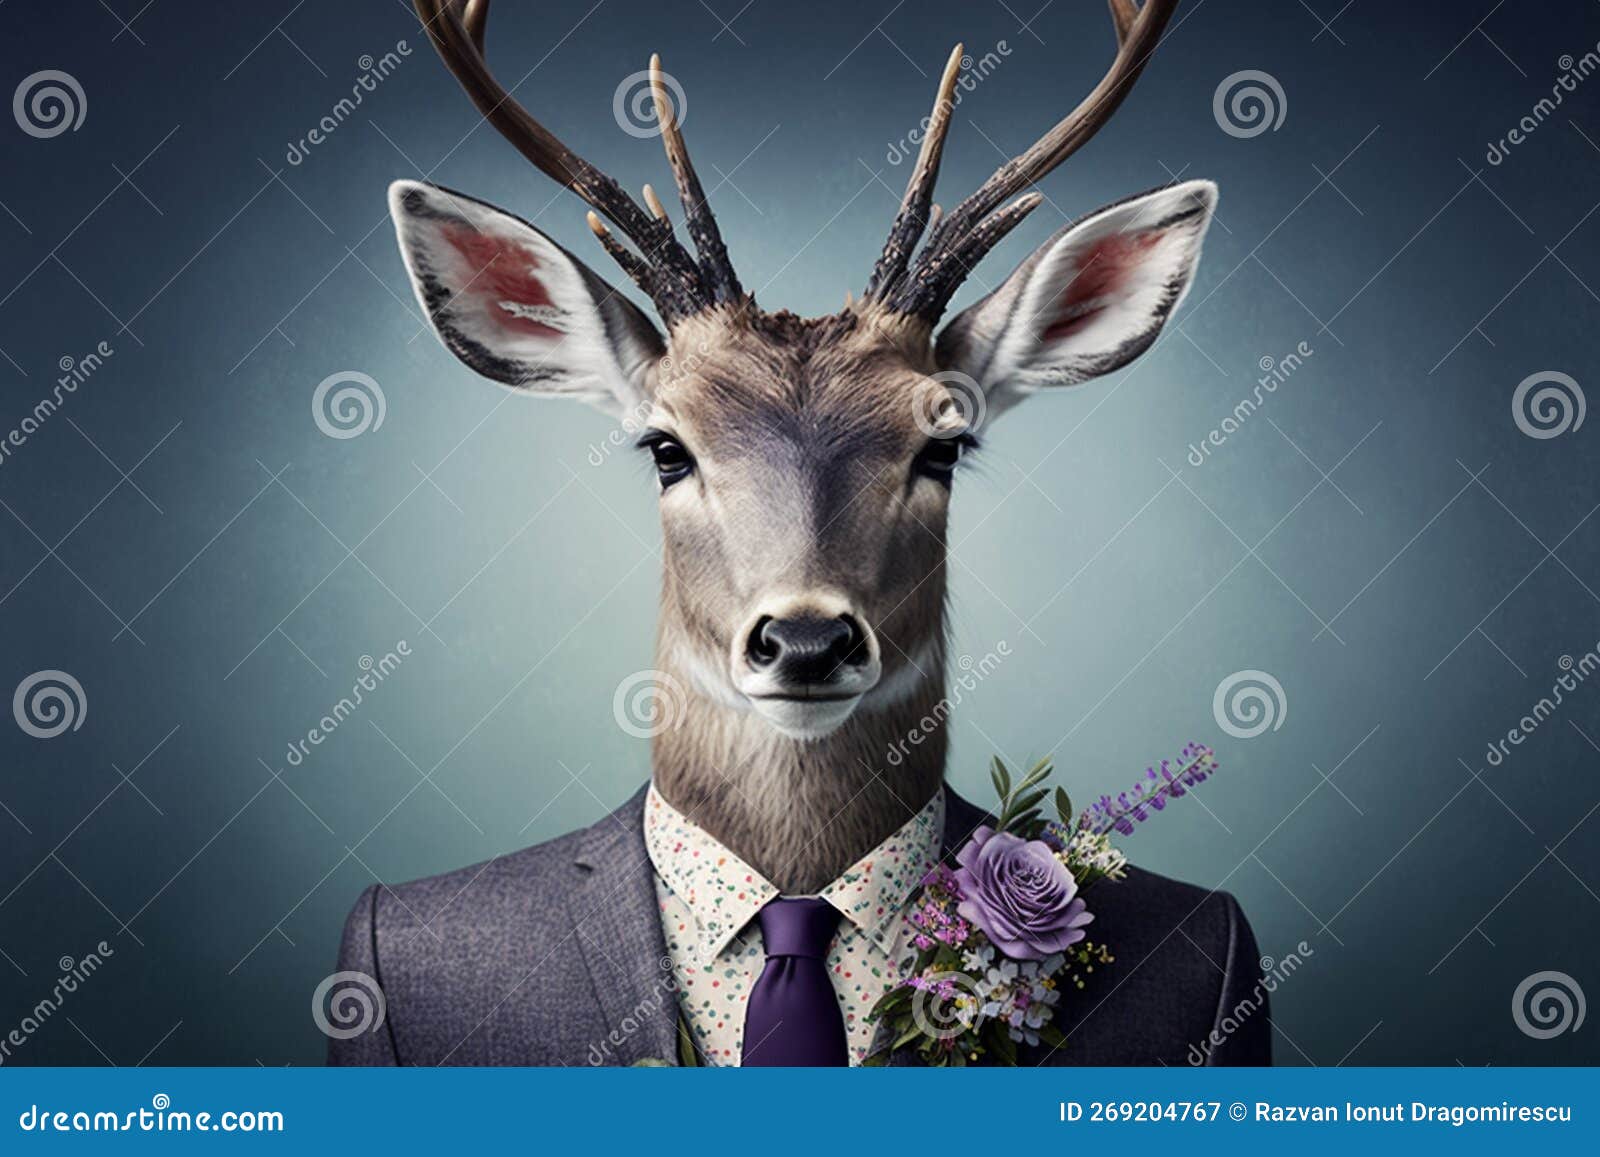 Deer Animal, Dressed in a Suit and Tie, Holding a Bouquet of Flowers ...